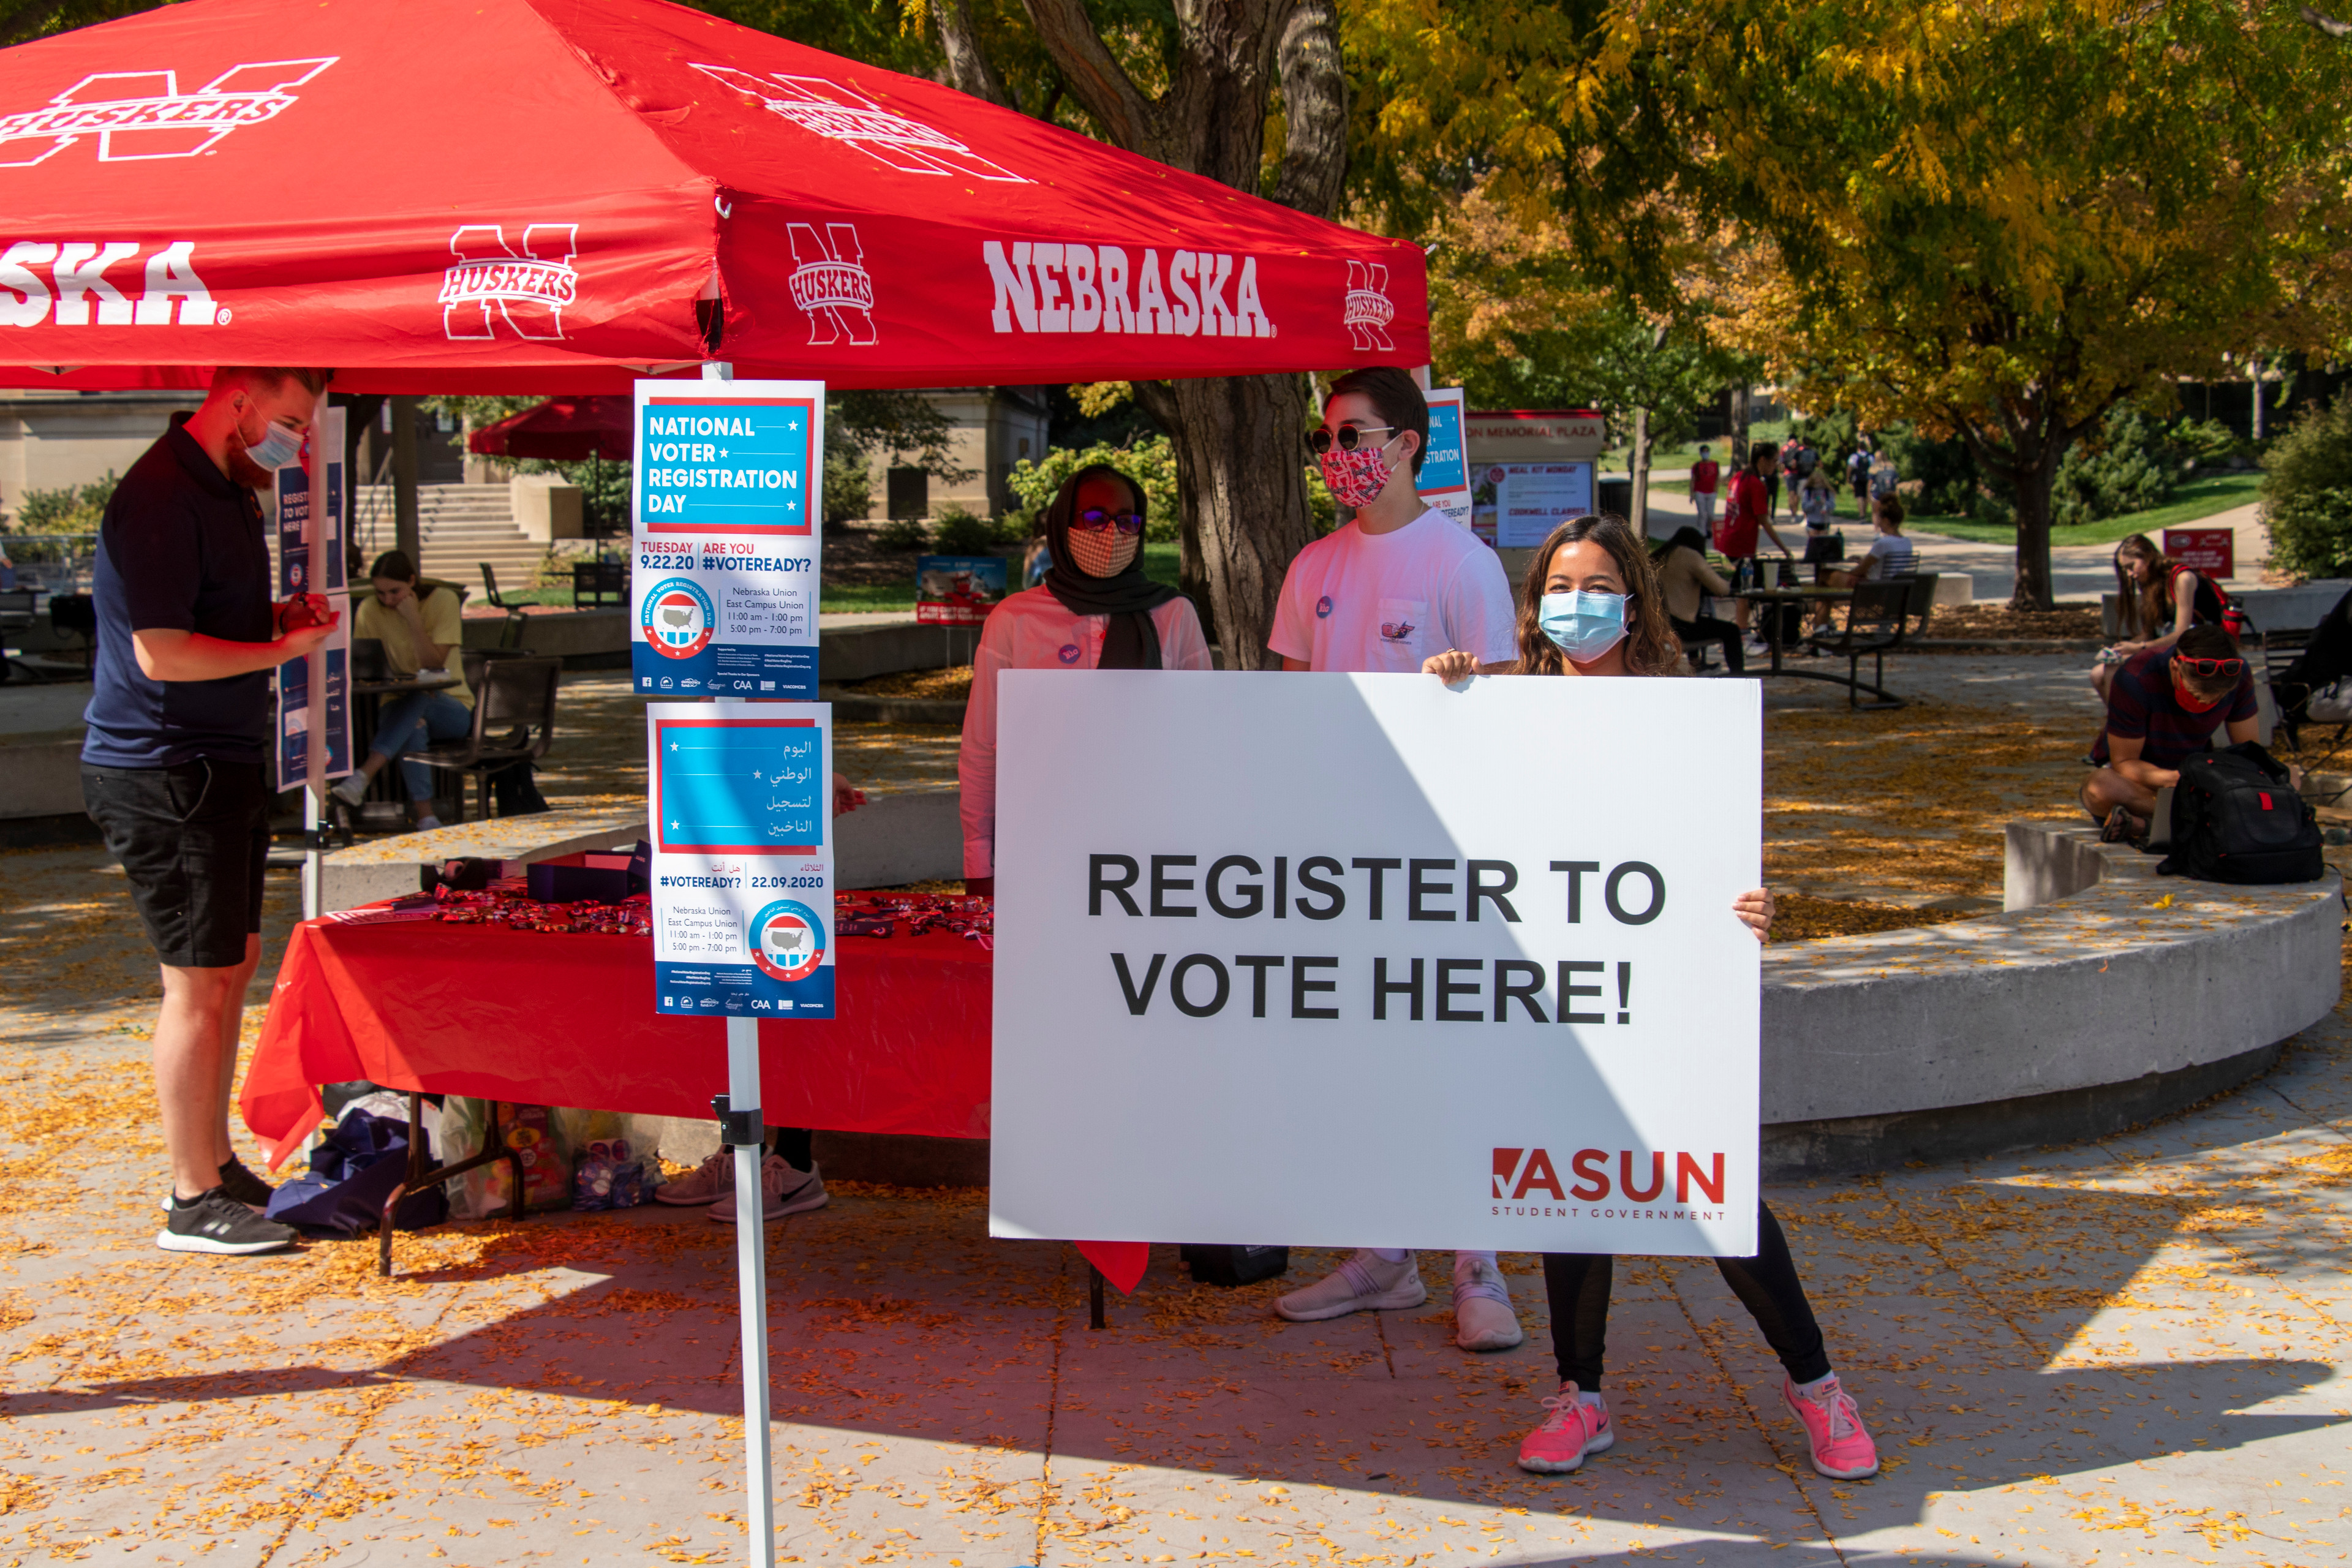 Voter registration events are happening Sept. 30, Oct. 6, Oct. 14 and Oct. 15 at the Nebraska Union Plaza, hosted by the Huskers Vote Coalition and ASUN.